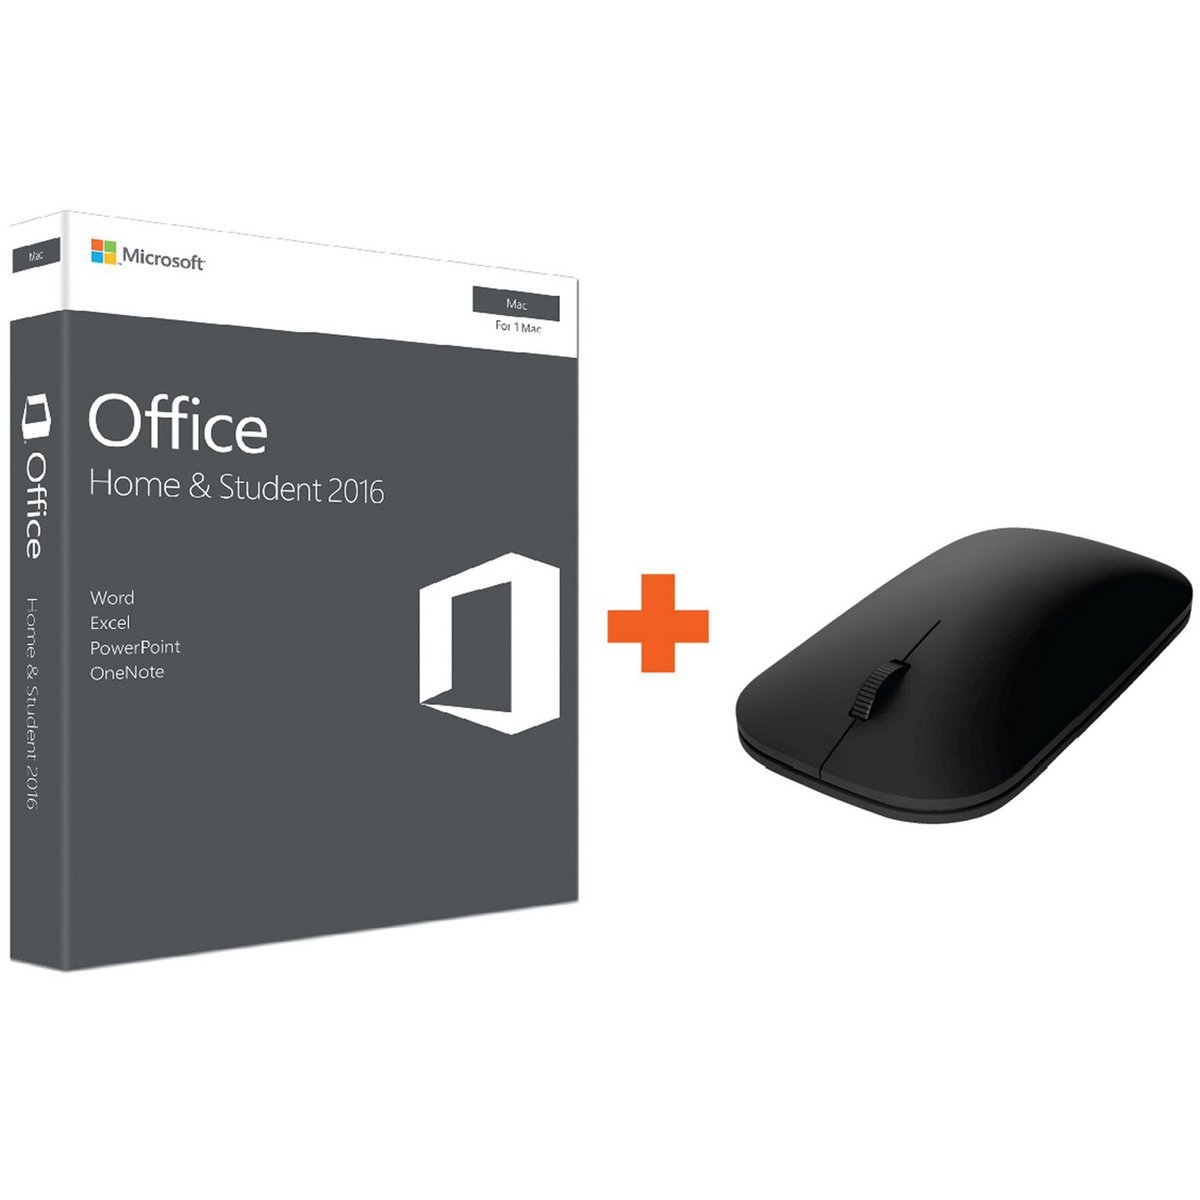 Microsoft Office Home & Student 2016 For MAC 2016 + Microsoft Designer Bluetooth Mouse